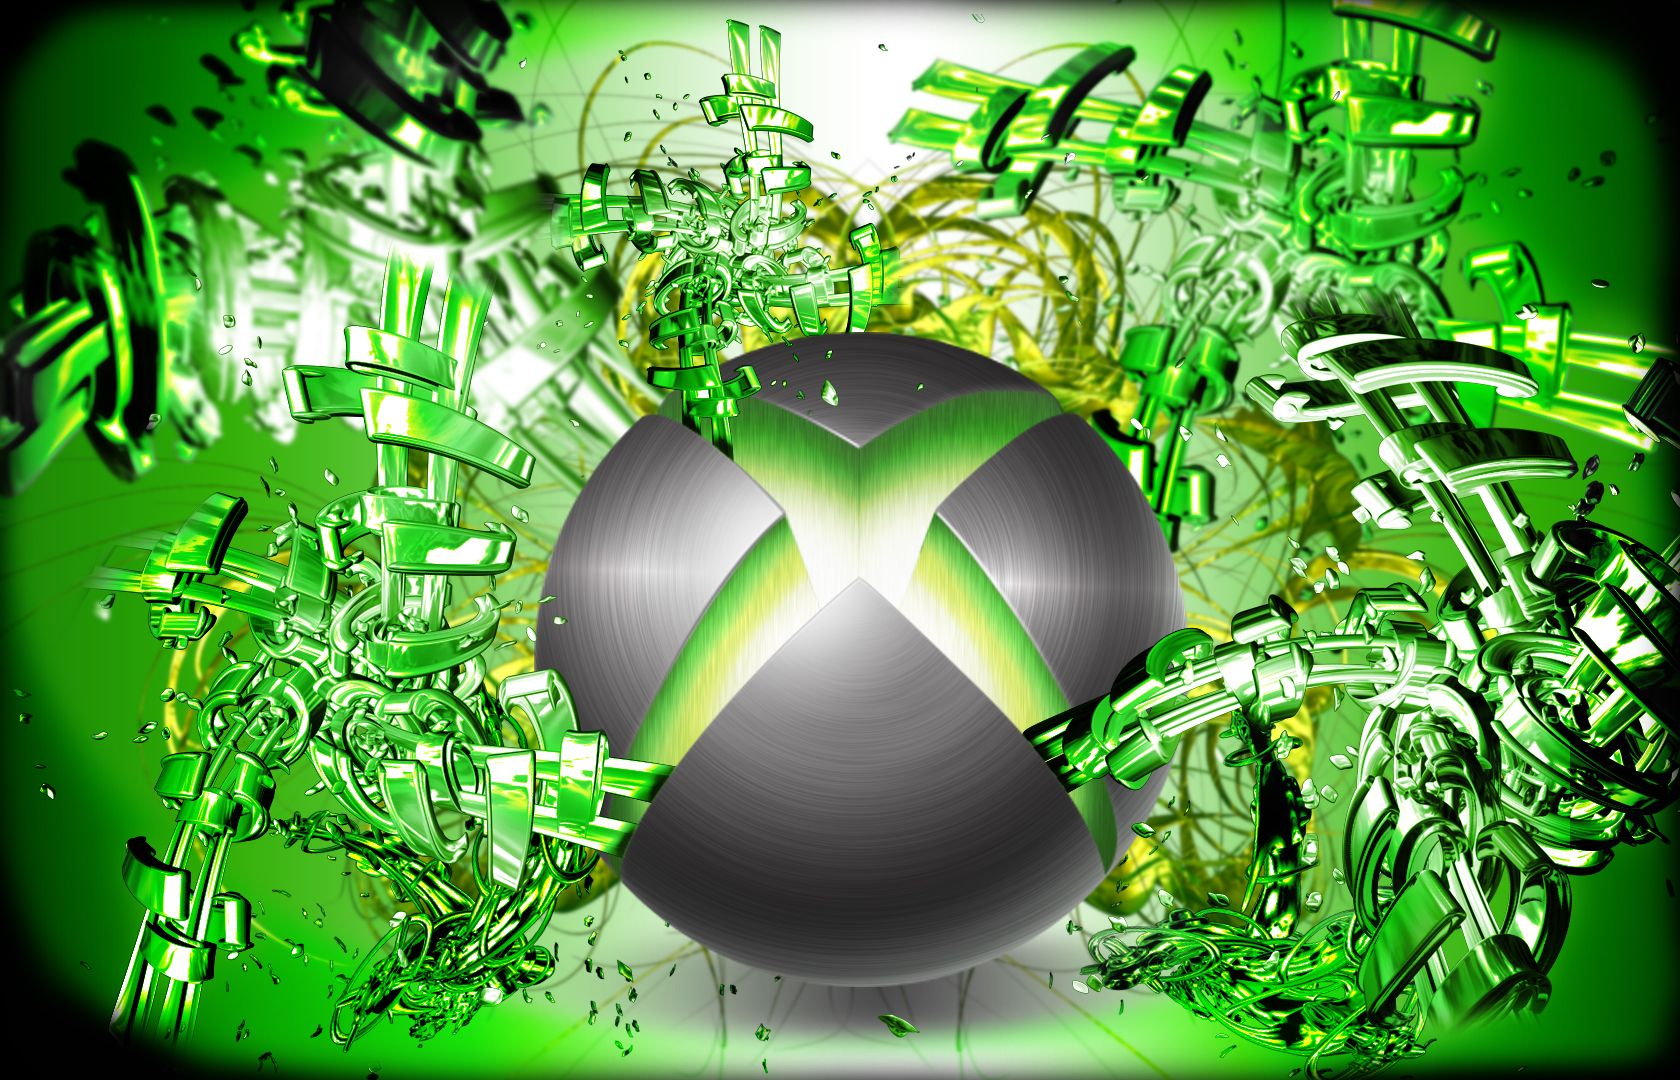 Cool Xbox Wallpapers Wallpapers